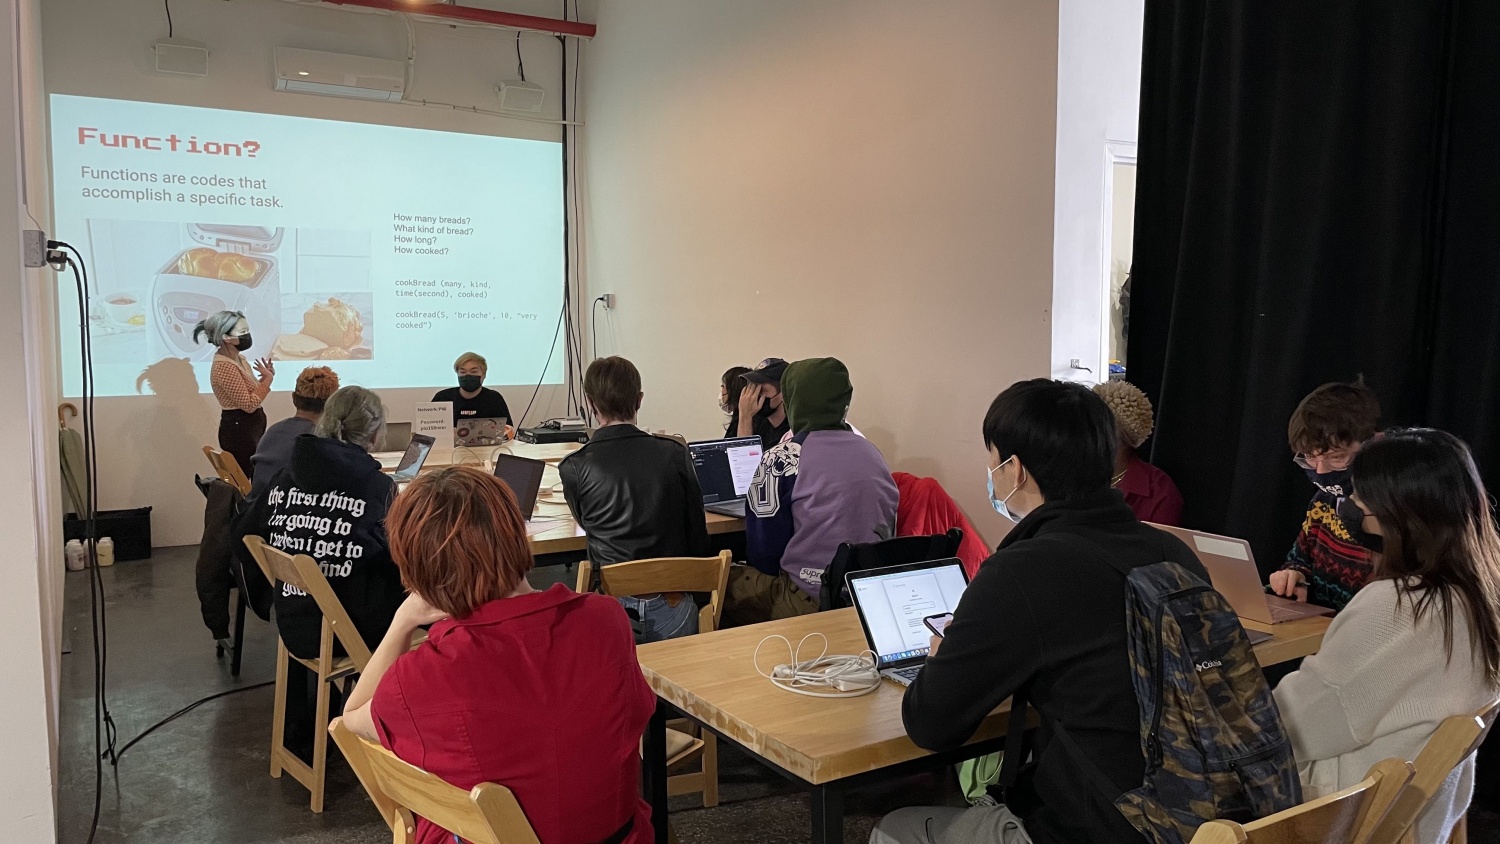 A group of 11 workshop participants sit around a long rectangular table while listening to Iley Cao and Munus Shih going over “function”, a computer programming concept. The projection on the back wall reads “Functions are codes that accomplish a specific task. How many breads? What kind of bread? How long? How cooked?”, accompanied by an image of a bread making machine.